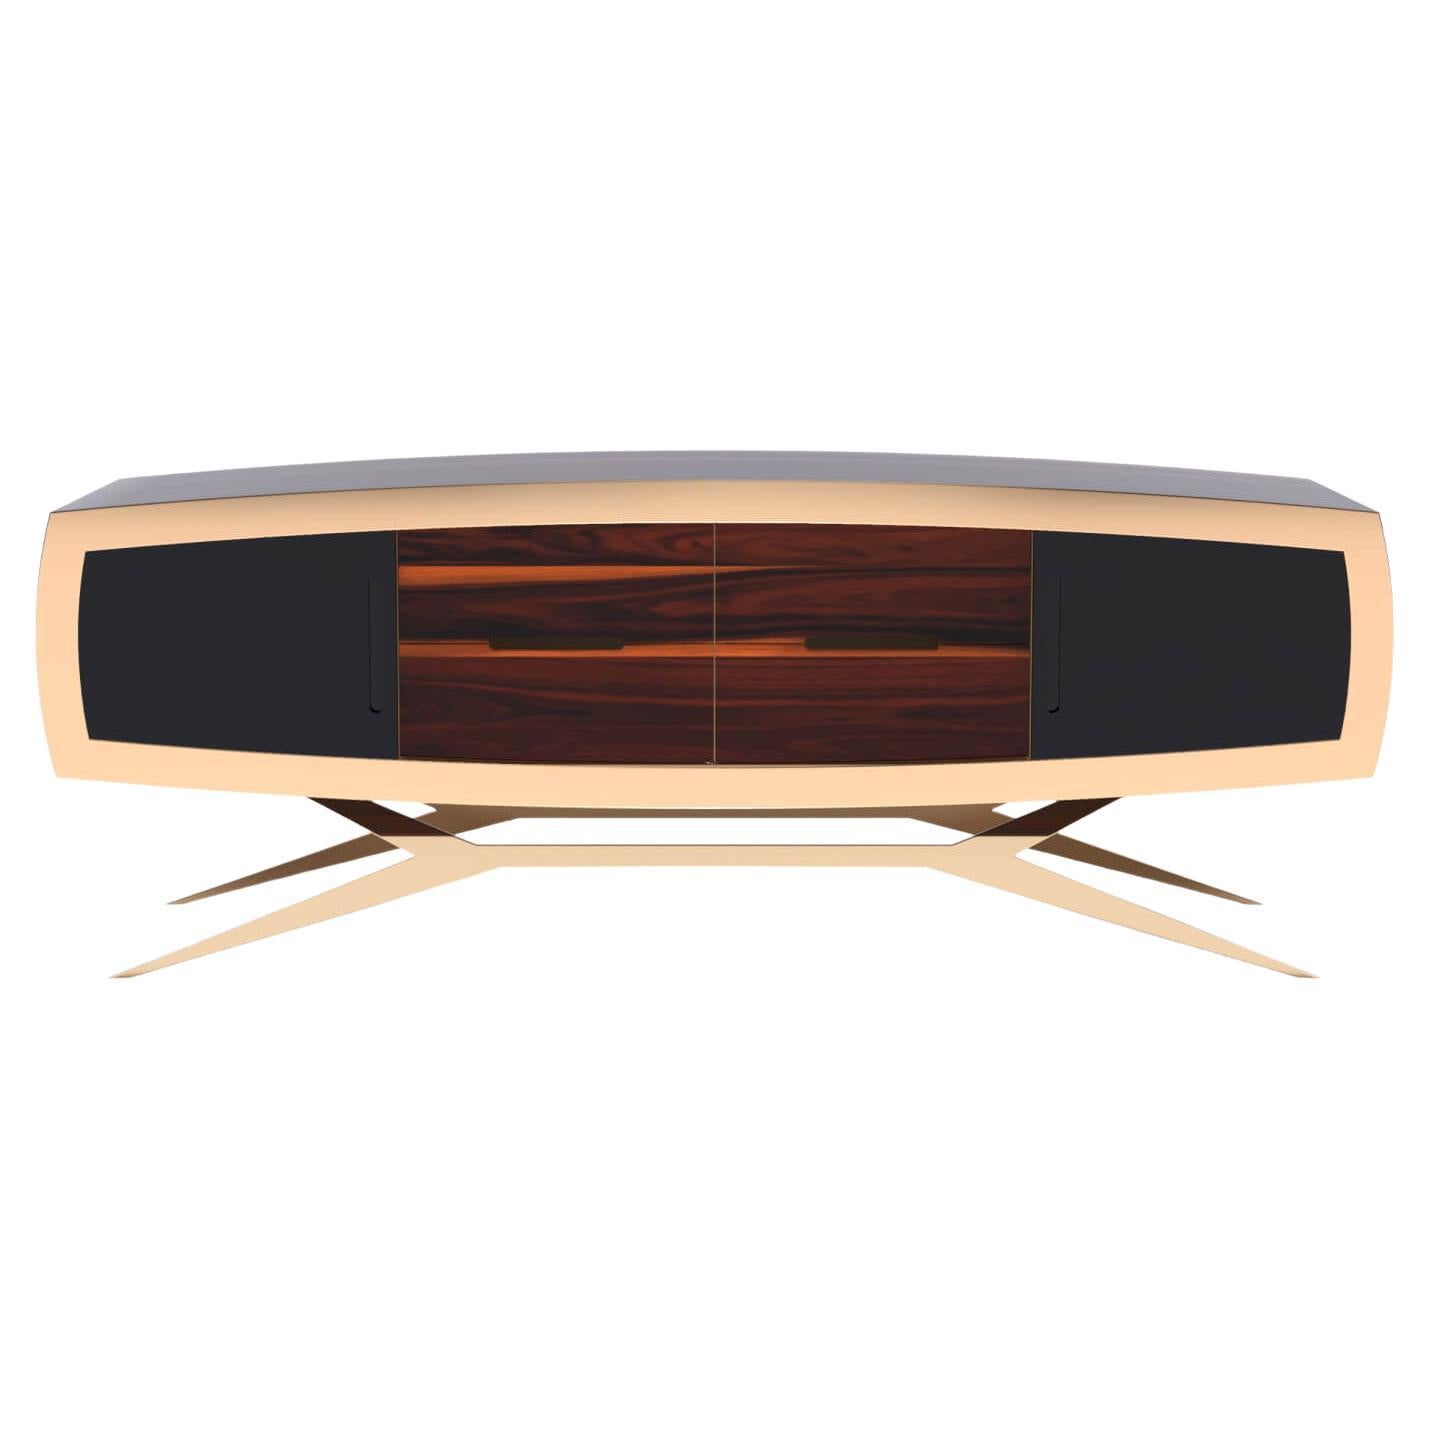 21st Century Modern Curved Credenza Sideboard Wood Black Lacquer Gold Finish